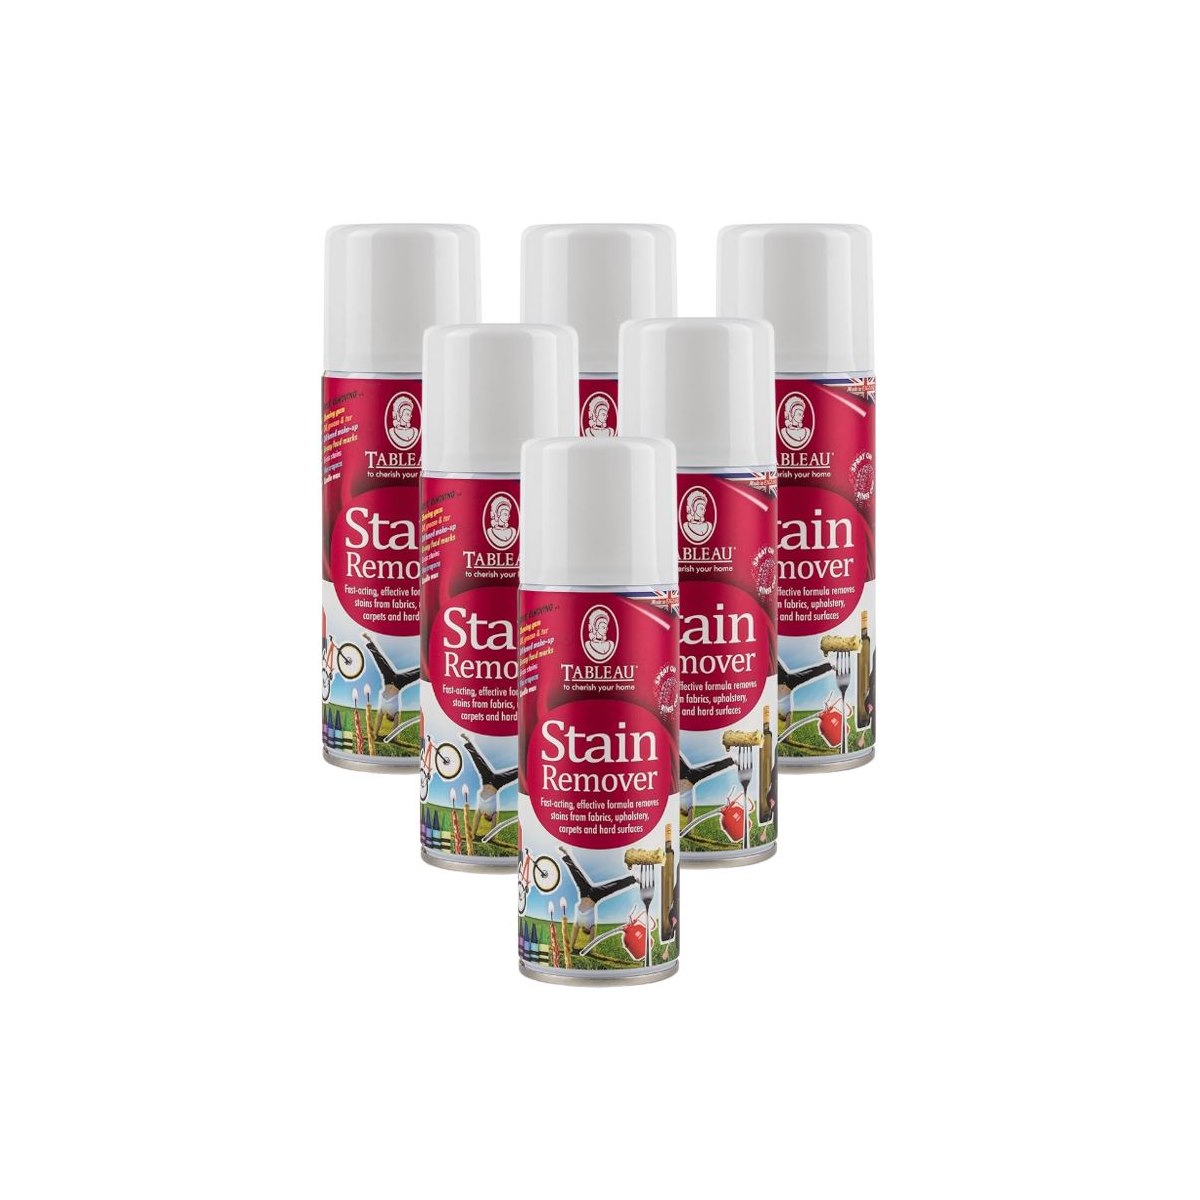 Case of 6 x Tableau Stain Remover Spray 200ml